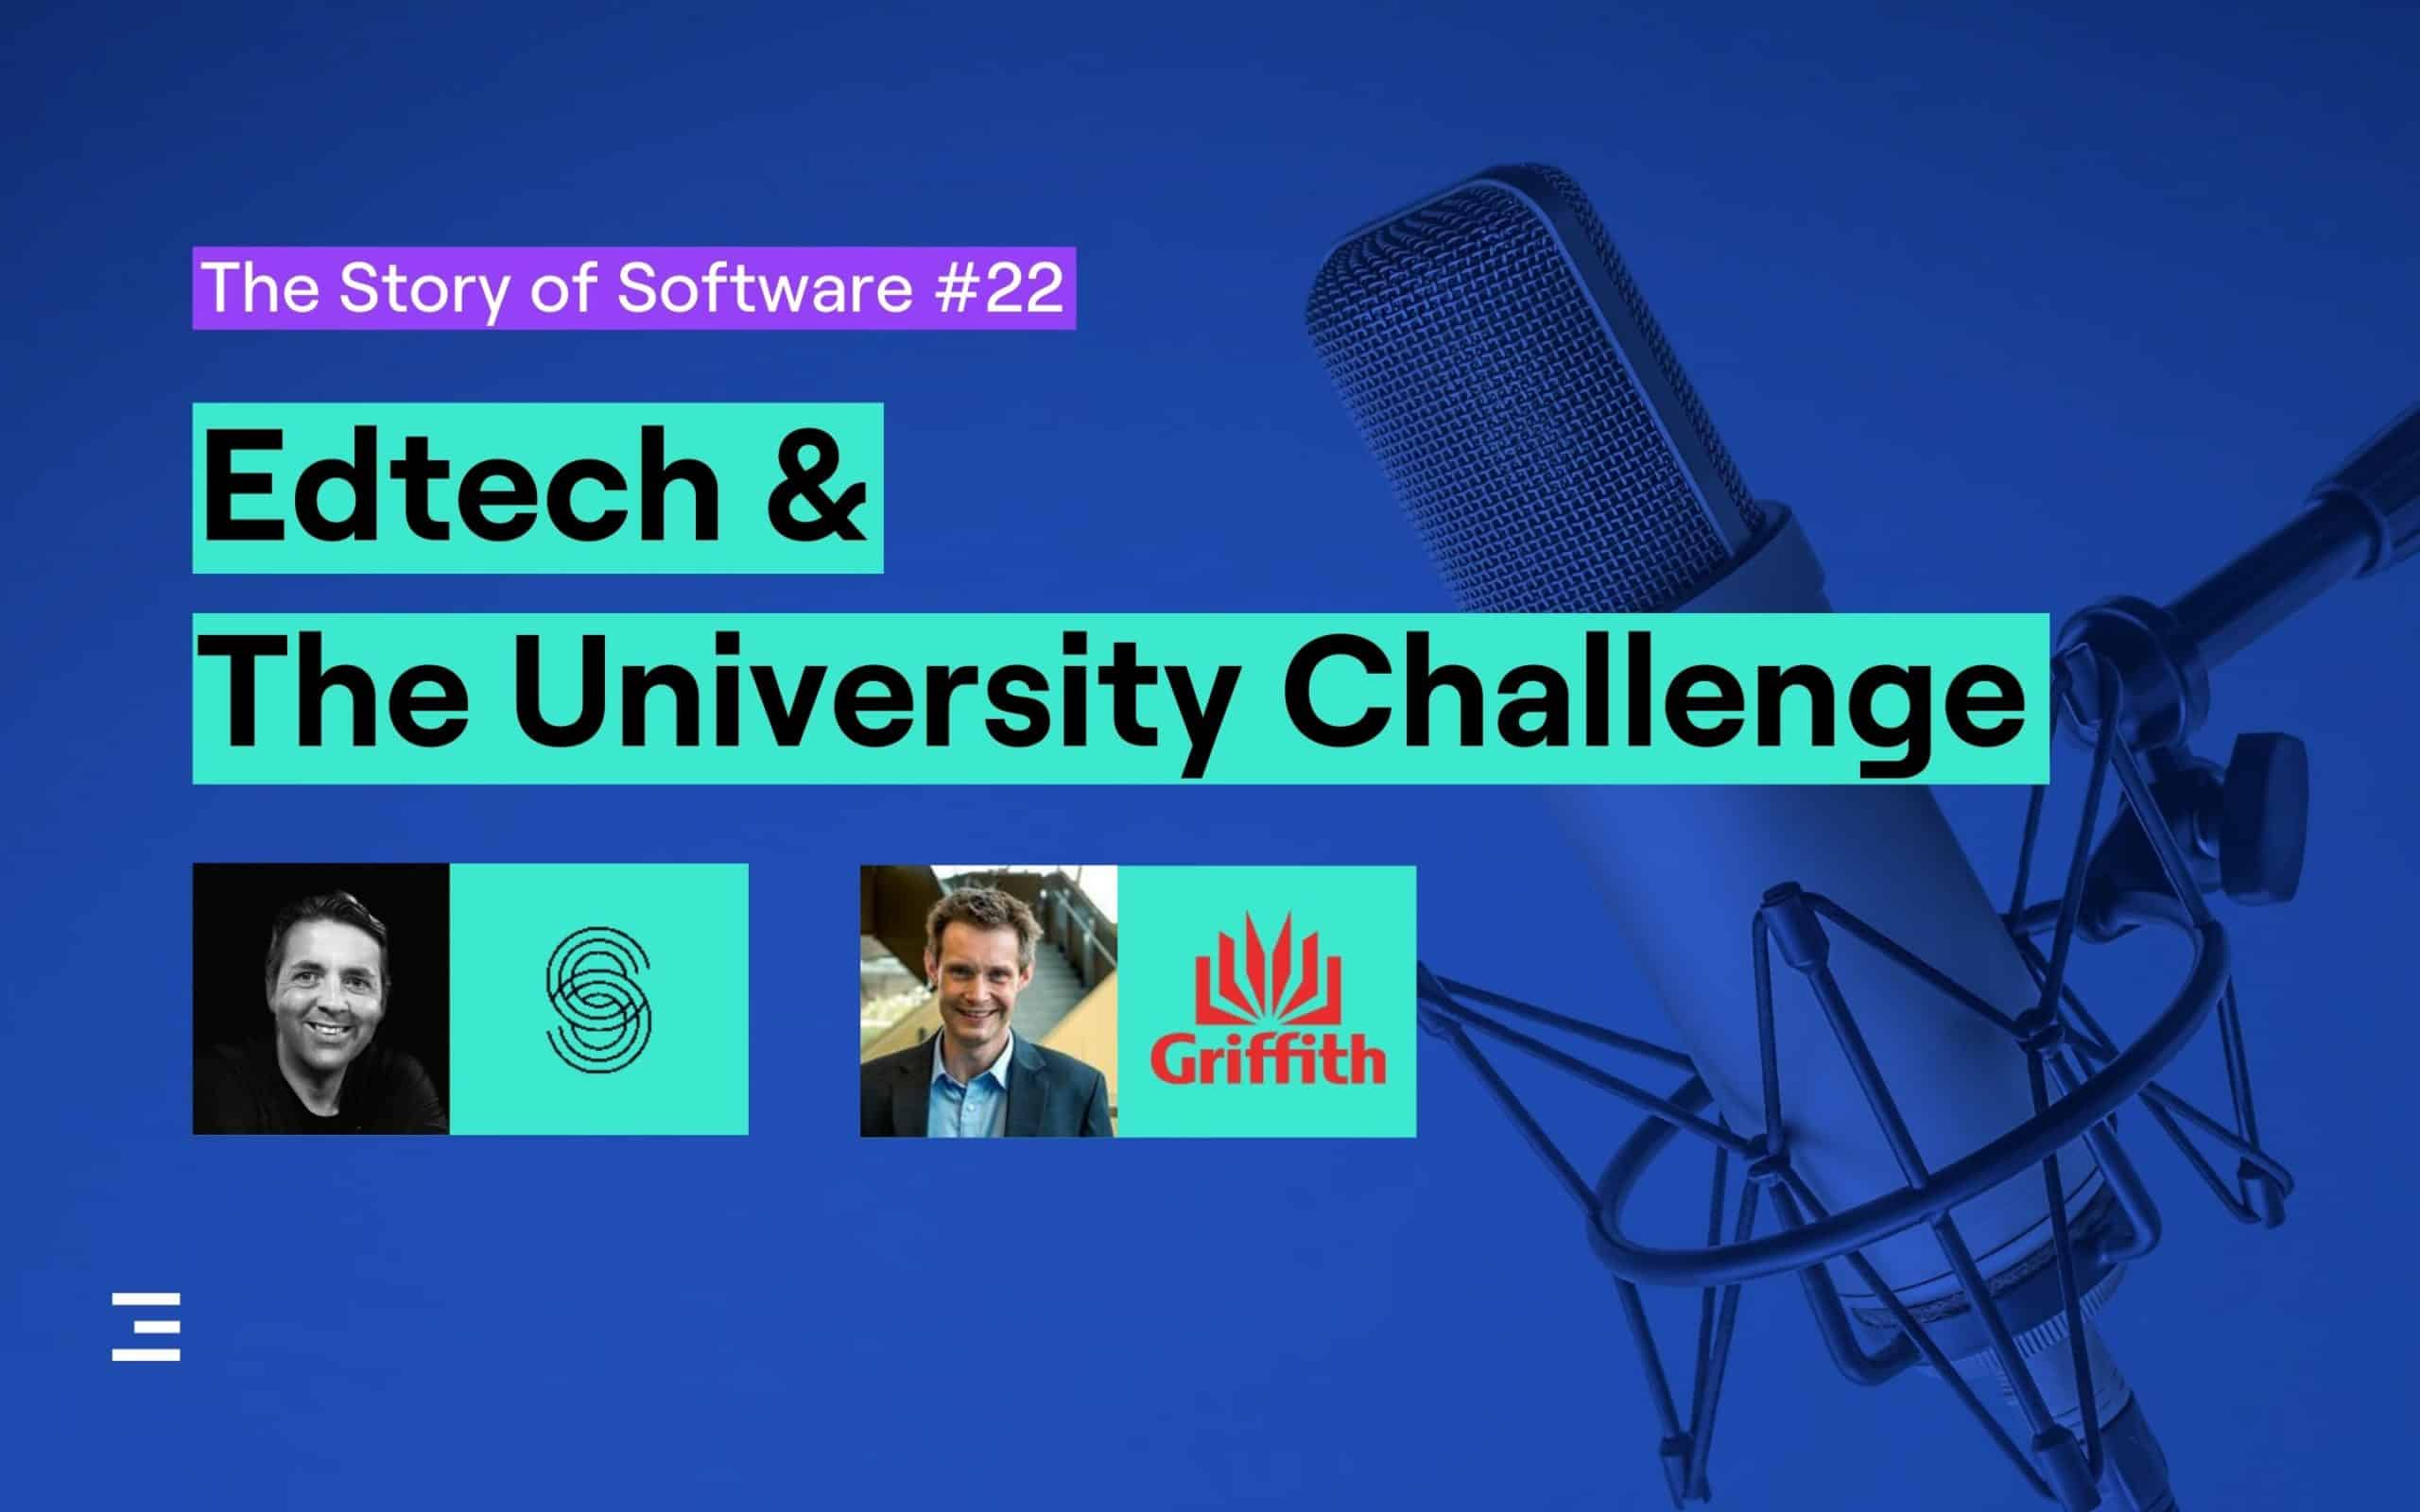 Edtech and the university challenge episode on the story of software podcast